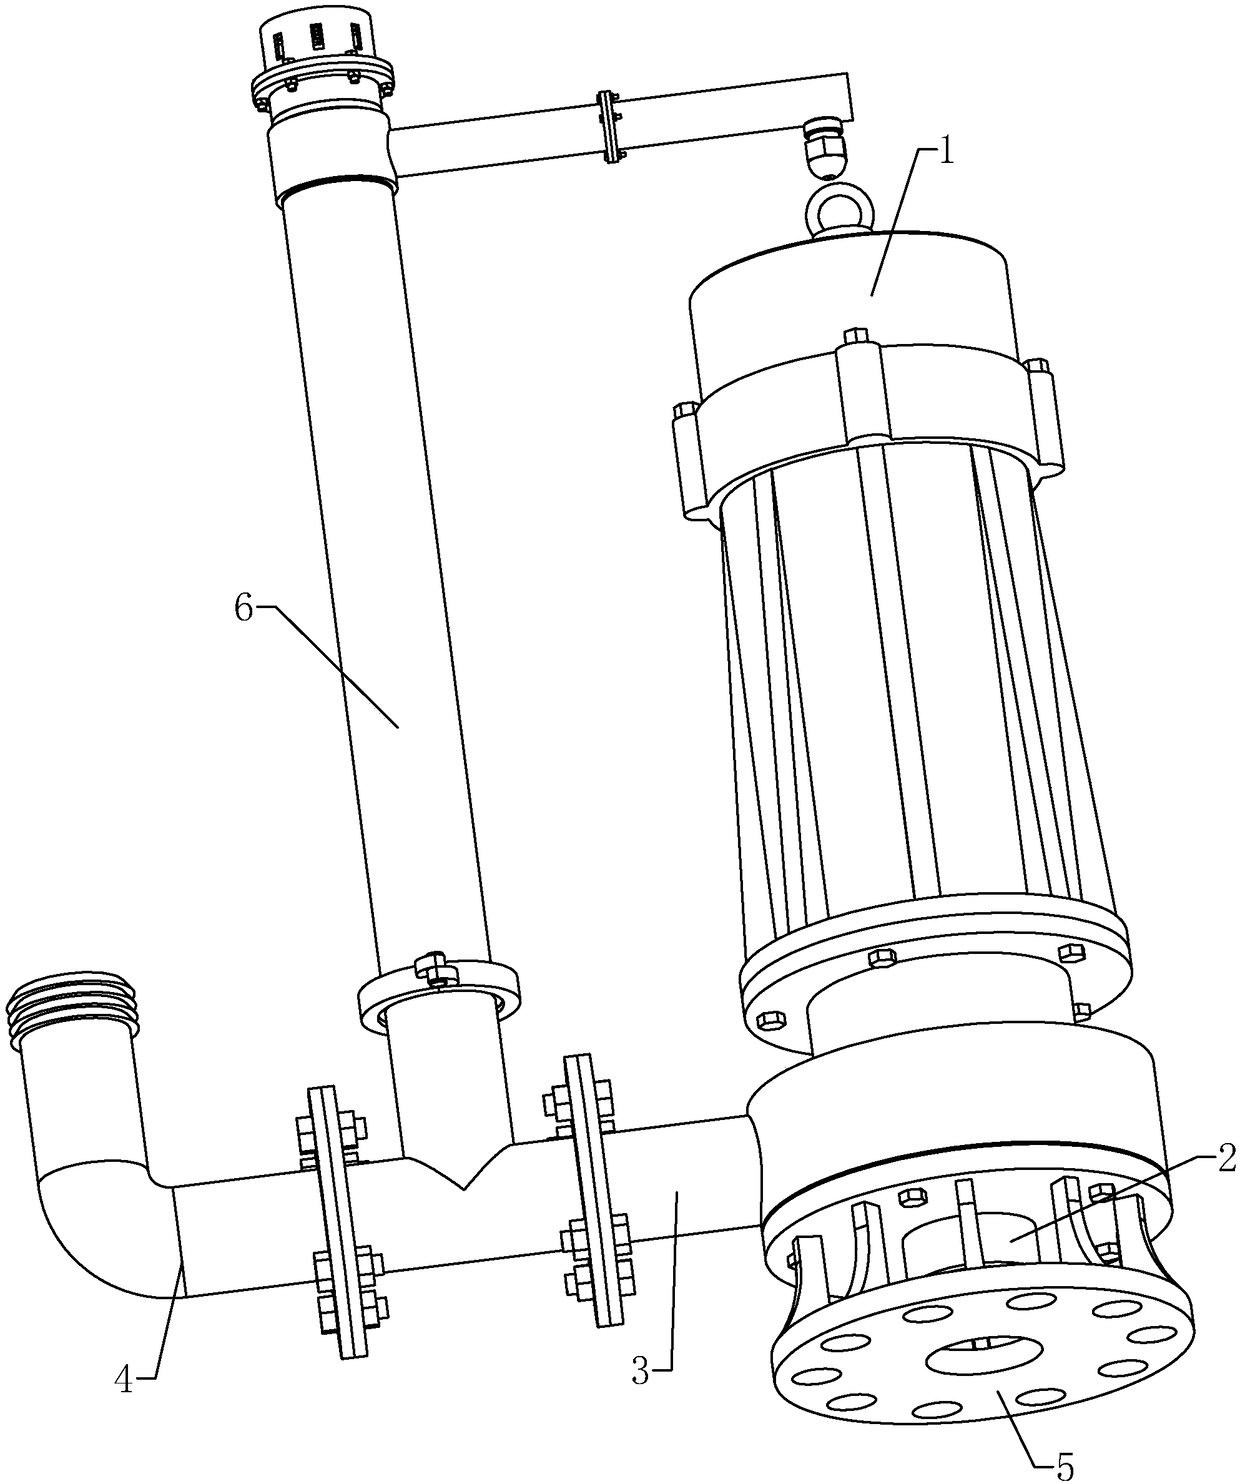 Automatic cooling device for submersible sewage pump